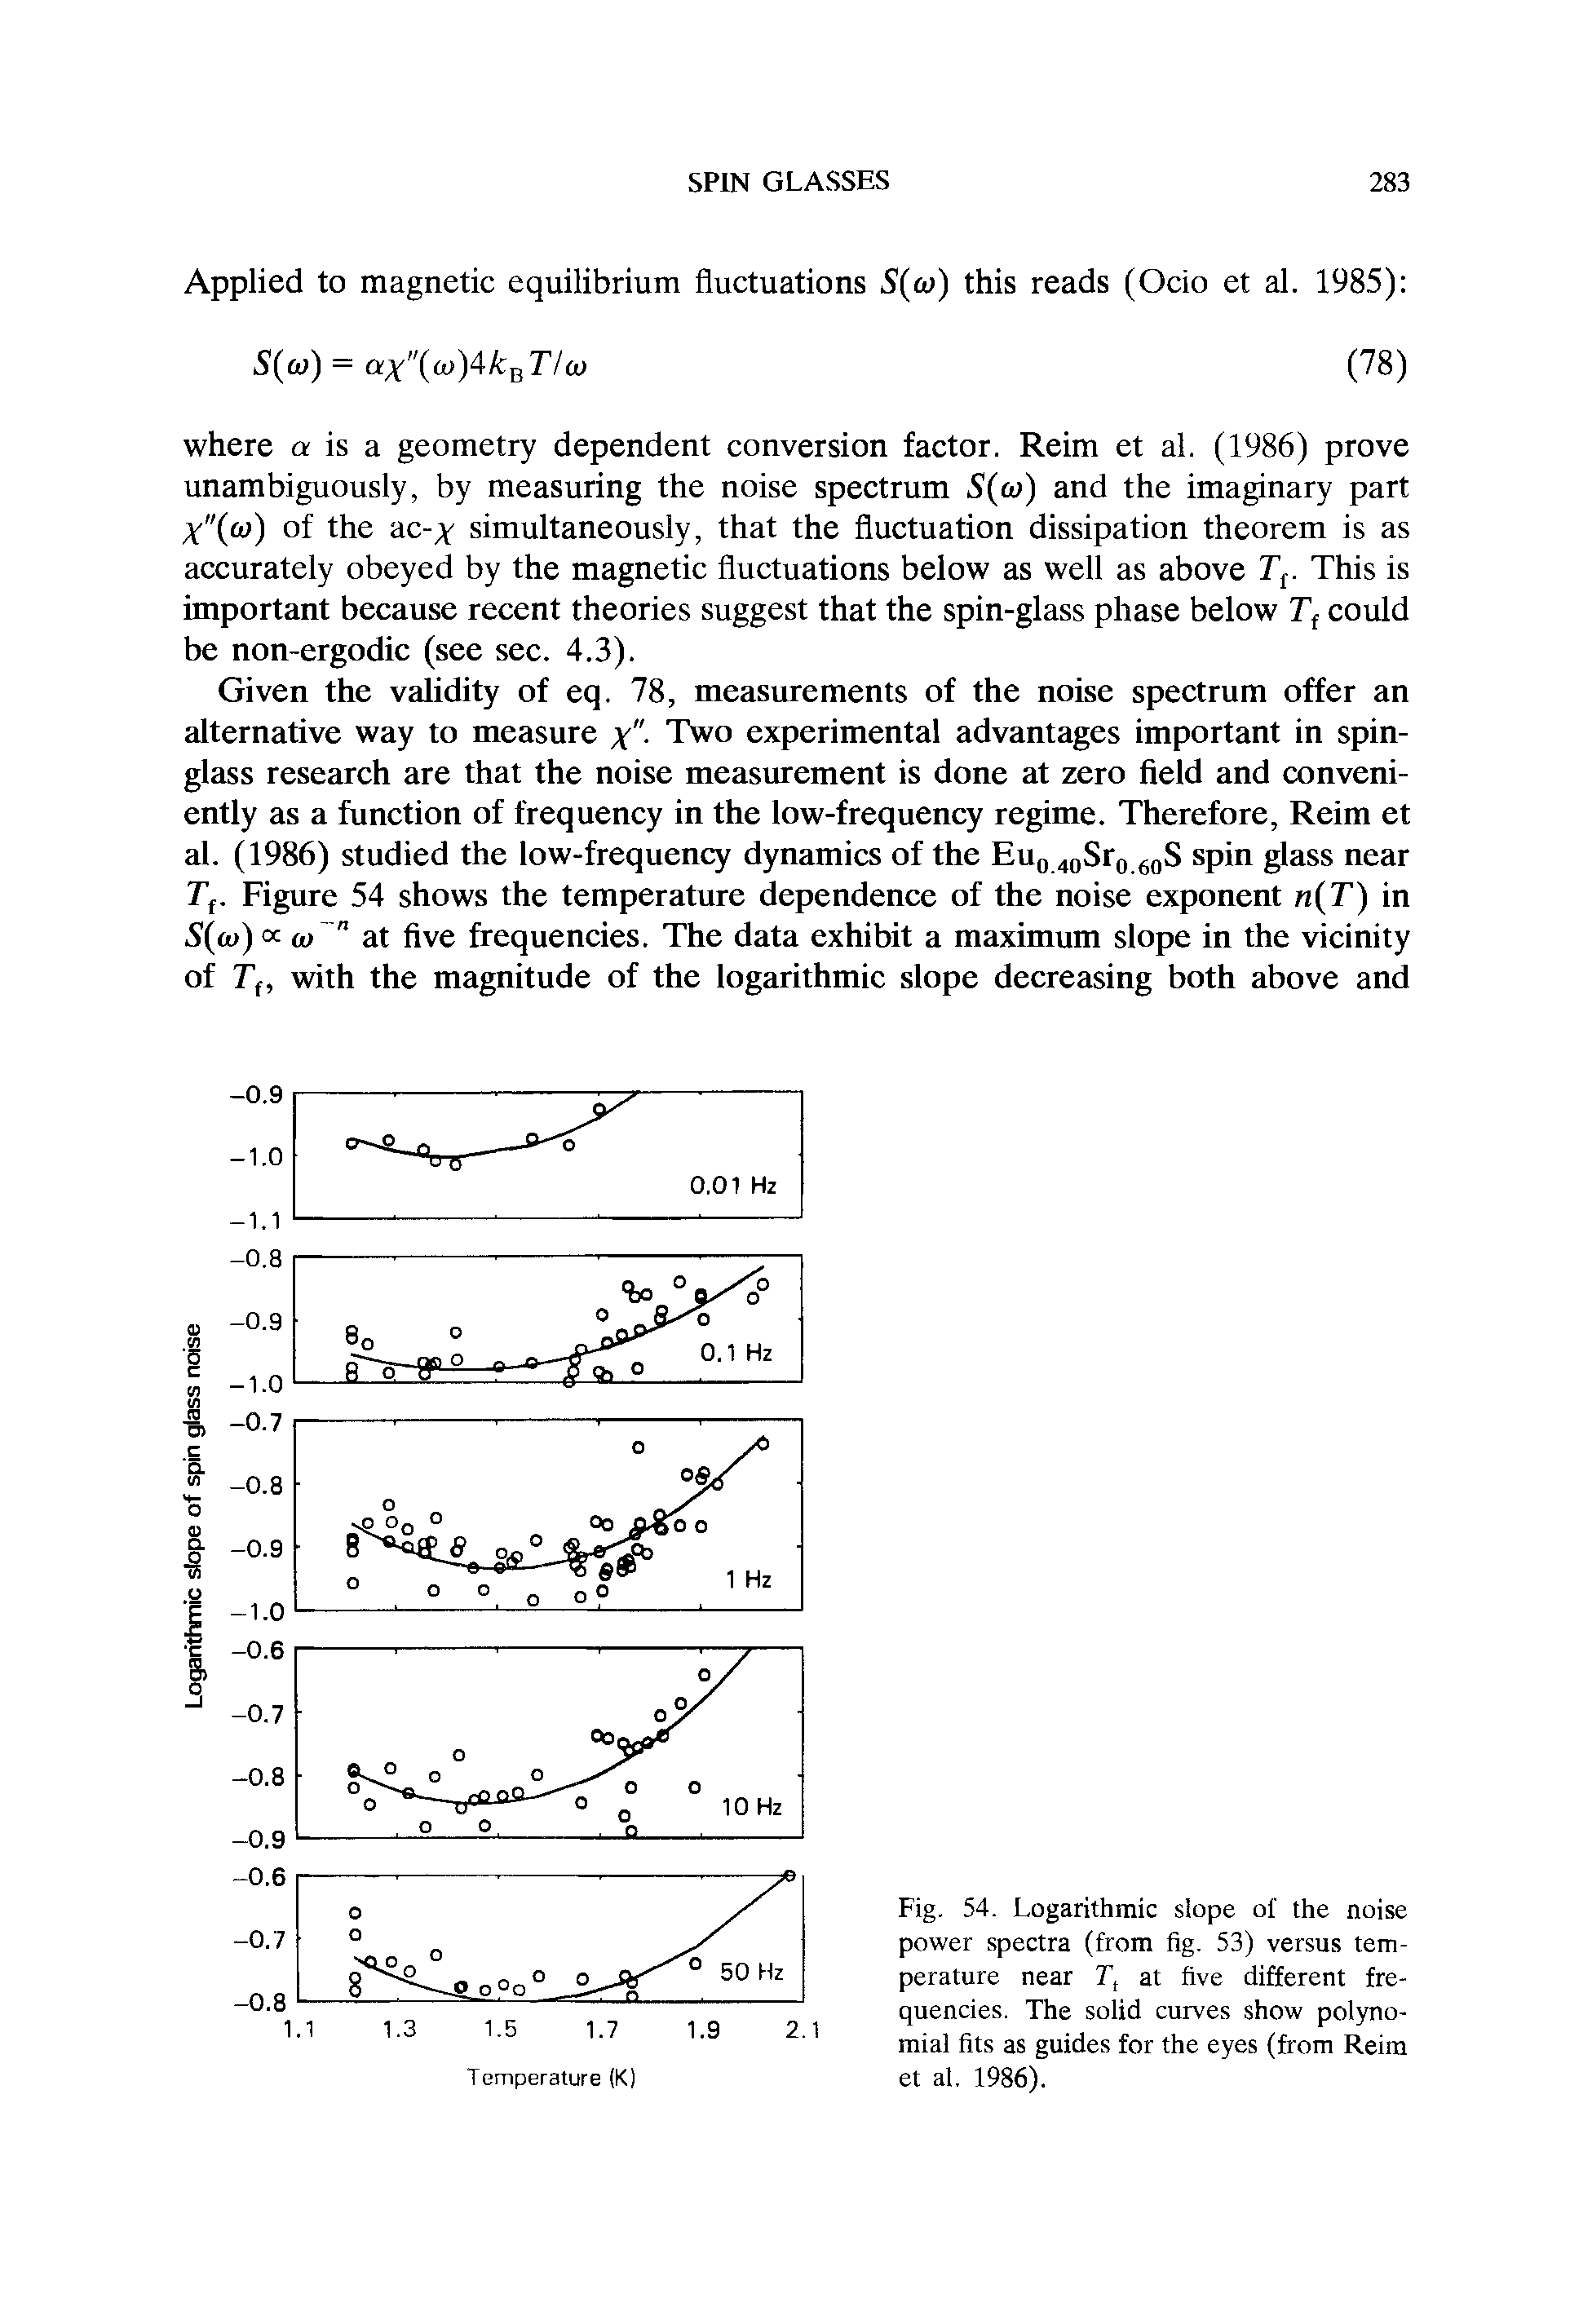 Fig. 54. Logarithmic slope of the noise power spectra (from fig. 53) versus temperature near T, at five different frequencies. The solid curves show polynomial fits as guides for the eyes (from Reim et al. 1986).